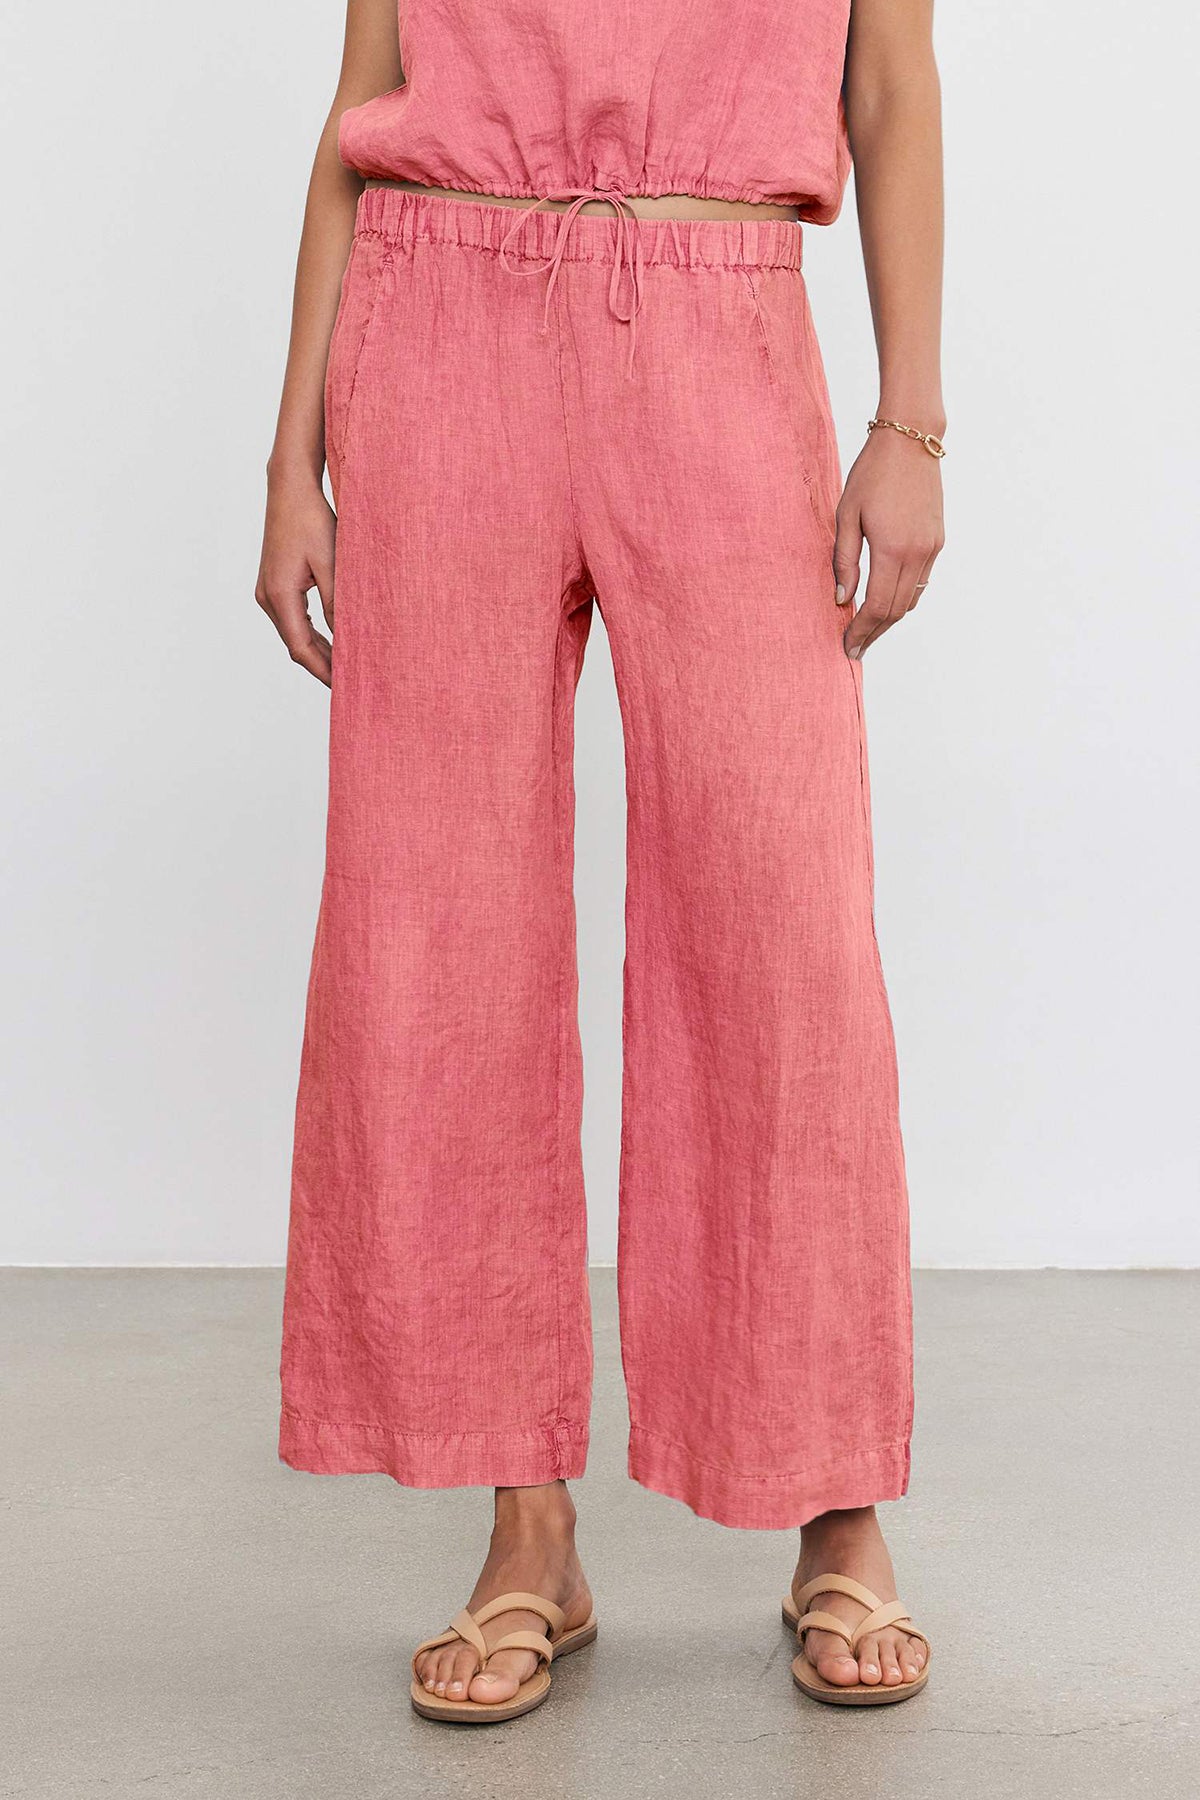 A person wearing lightweight pink LOLA LINEN PANT by Velvet by Graham & Spencer with an elastic waistband and drawstring, a matching top, a bracelet on the left wrist, and beige sandals on a plain grey floor.-36943740600513